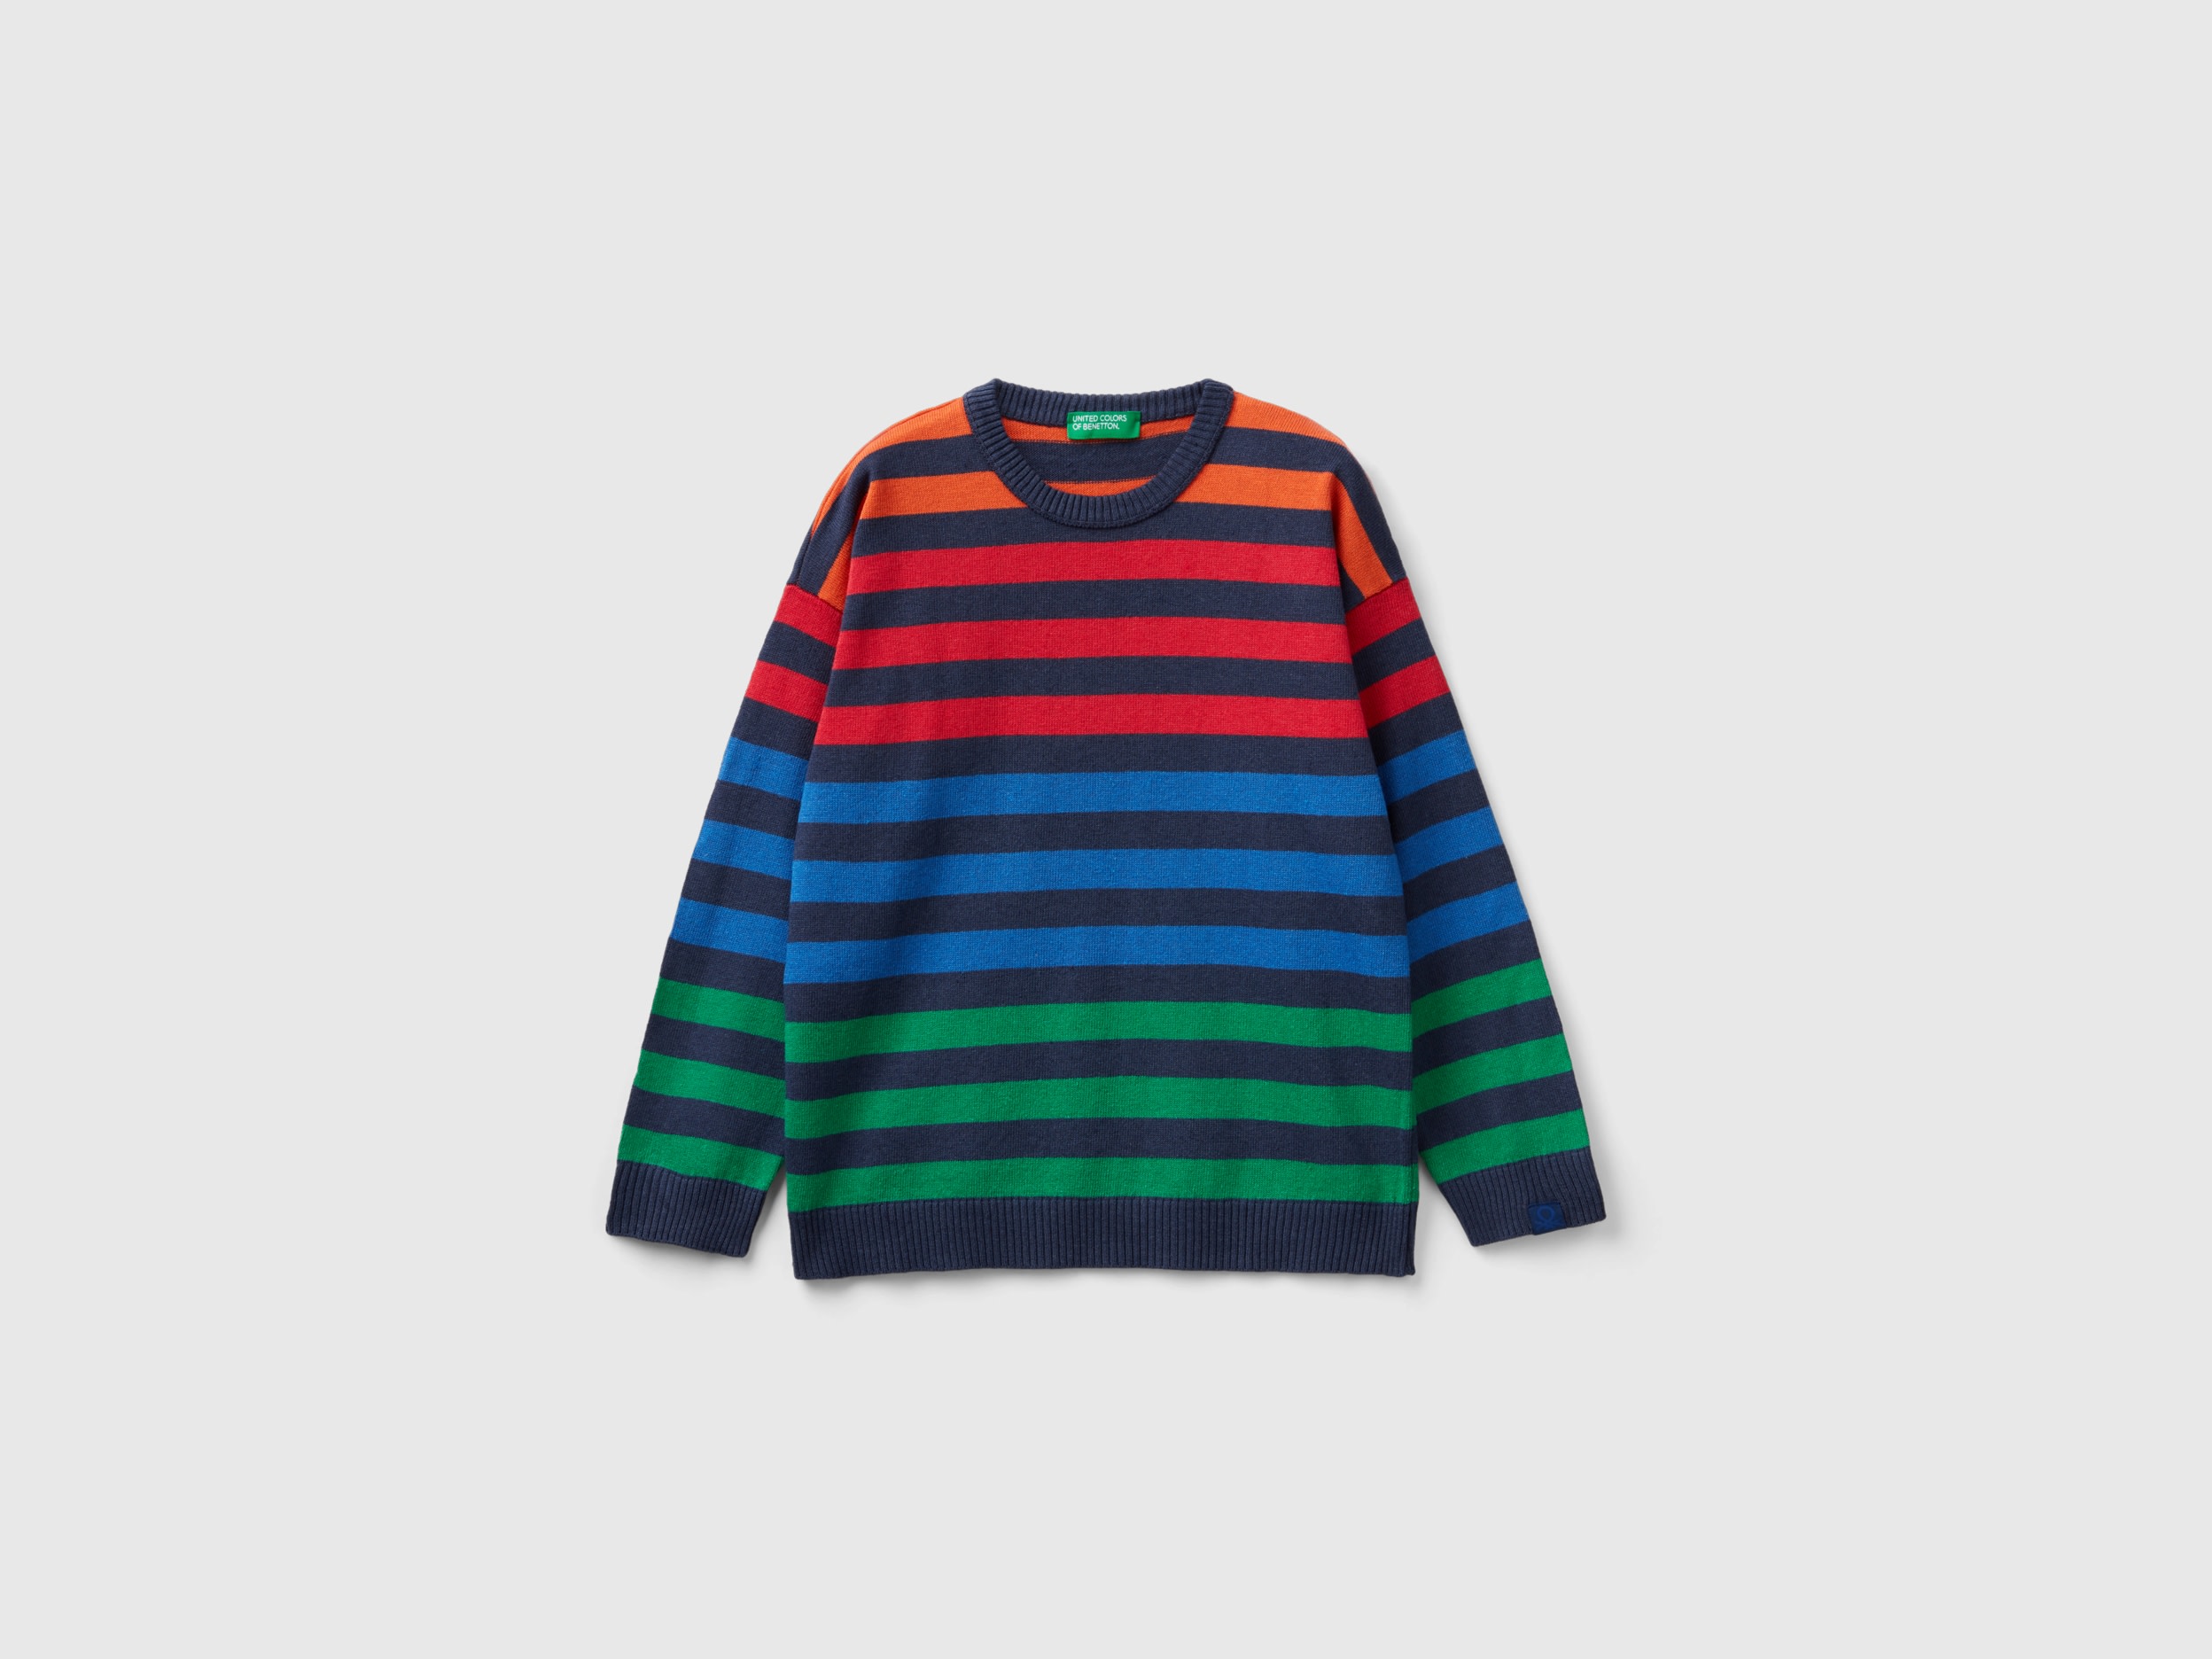 Image of Benetton, Striped Sweater, size S, Multi-color, Kids